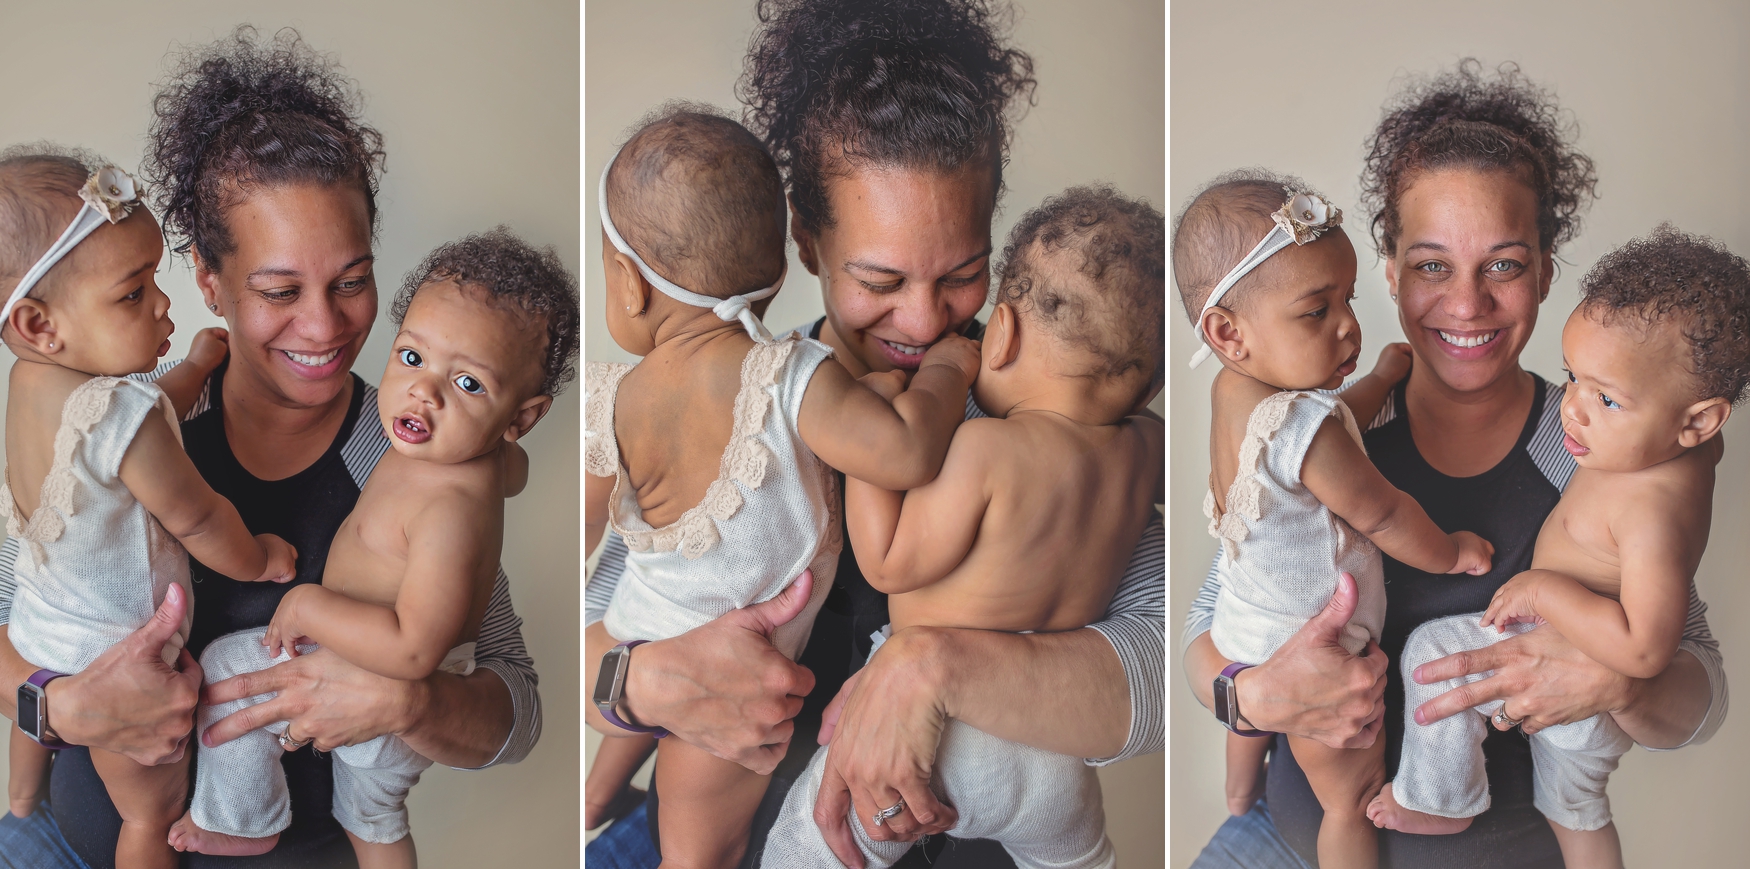 My favorite photos from our session - Mama hugging twins!